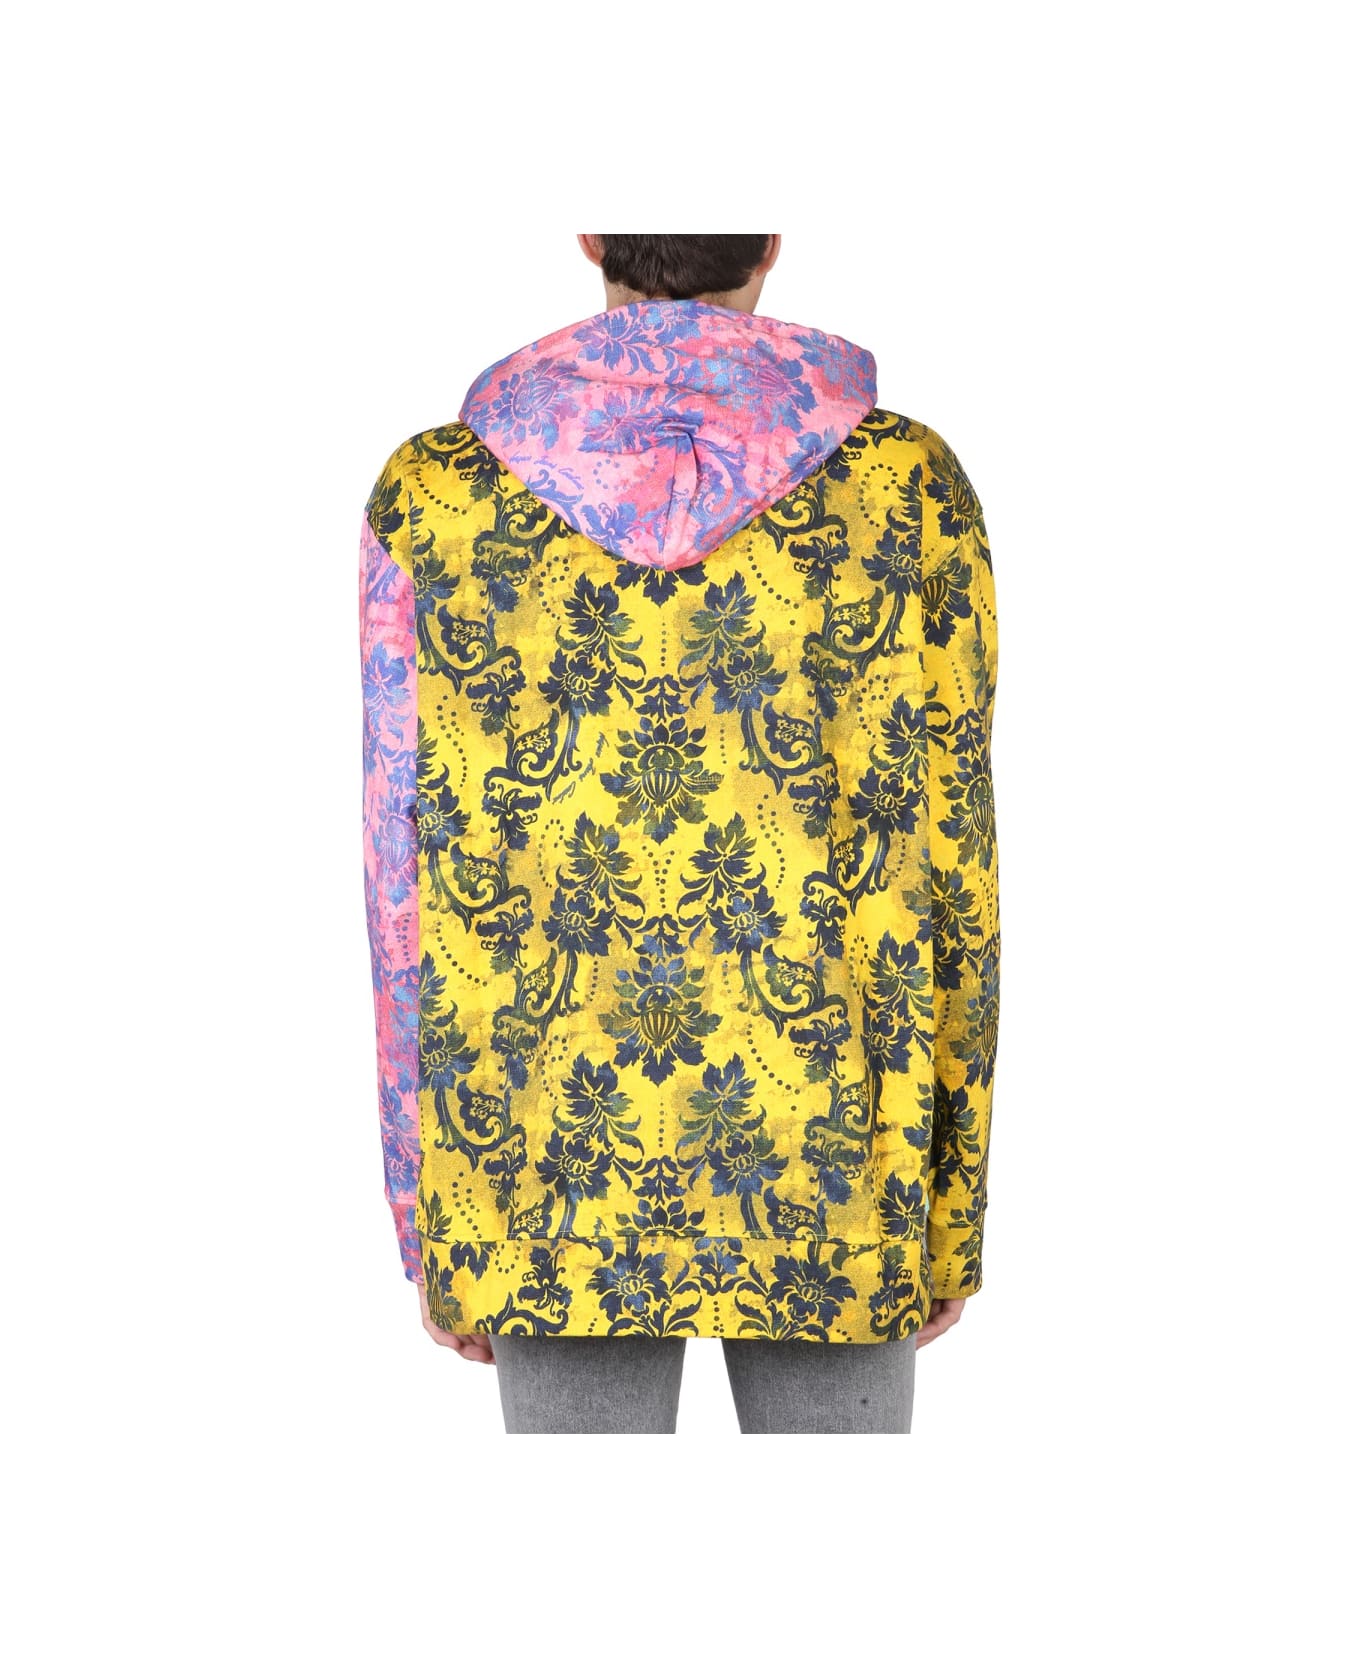 Versace Jeans Couture Sweatshirt With "tapestly" Print - MULTICOLOUR